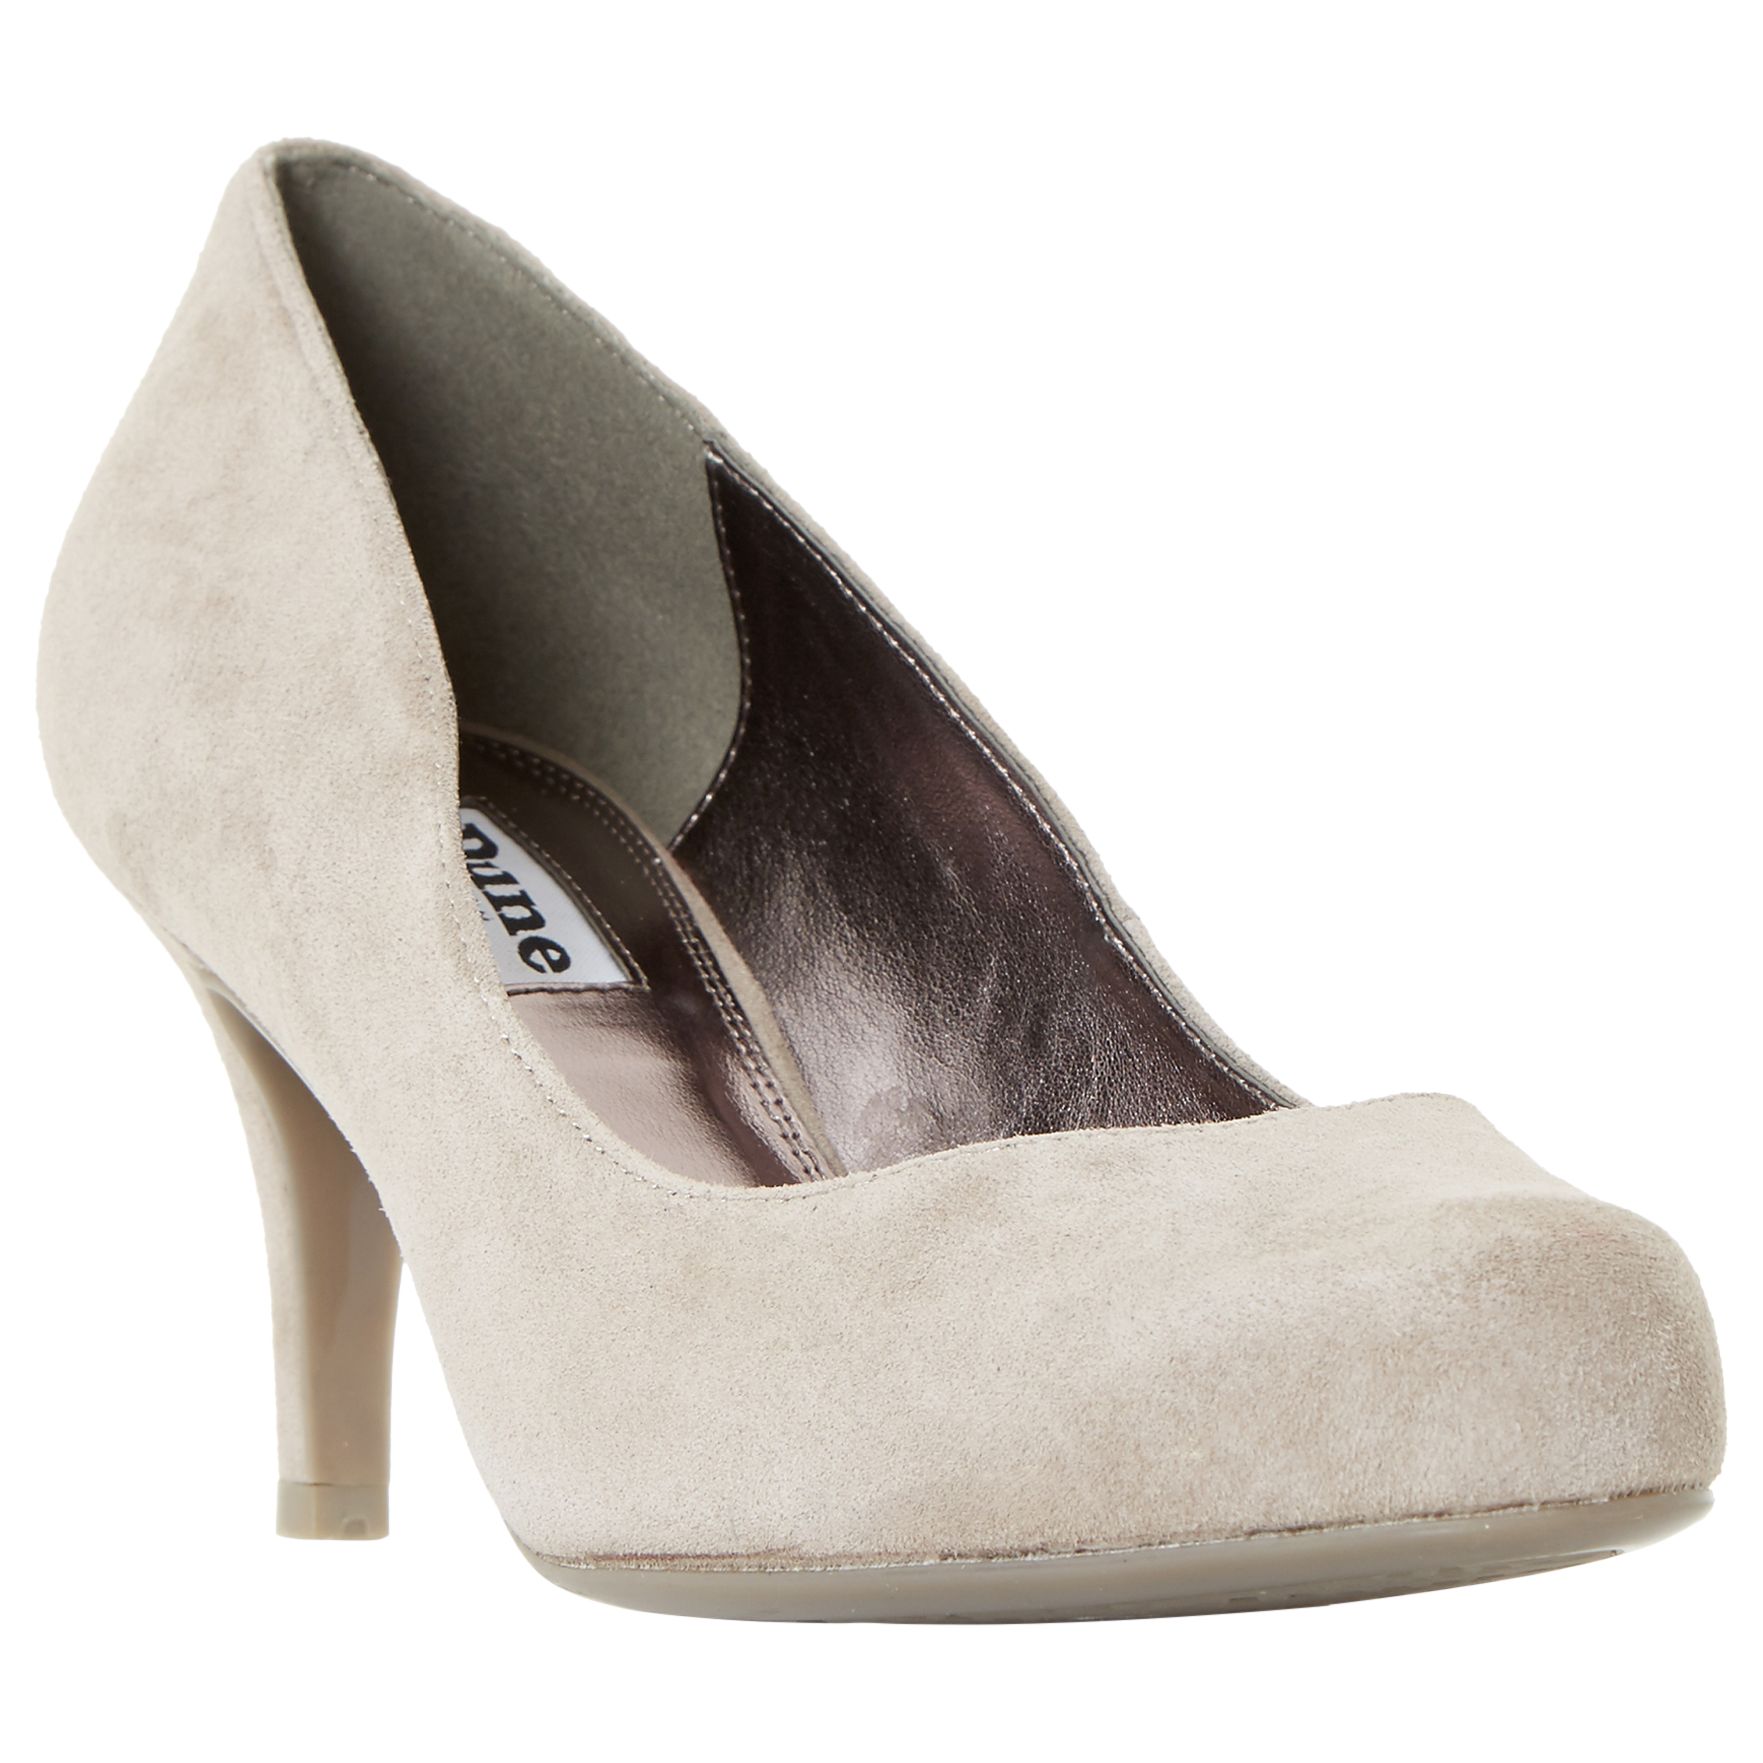 Dune Amelia Stiletto Heeled Court Shoes, Taupe Suede, 5